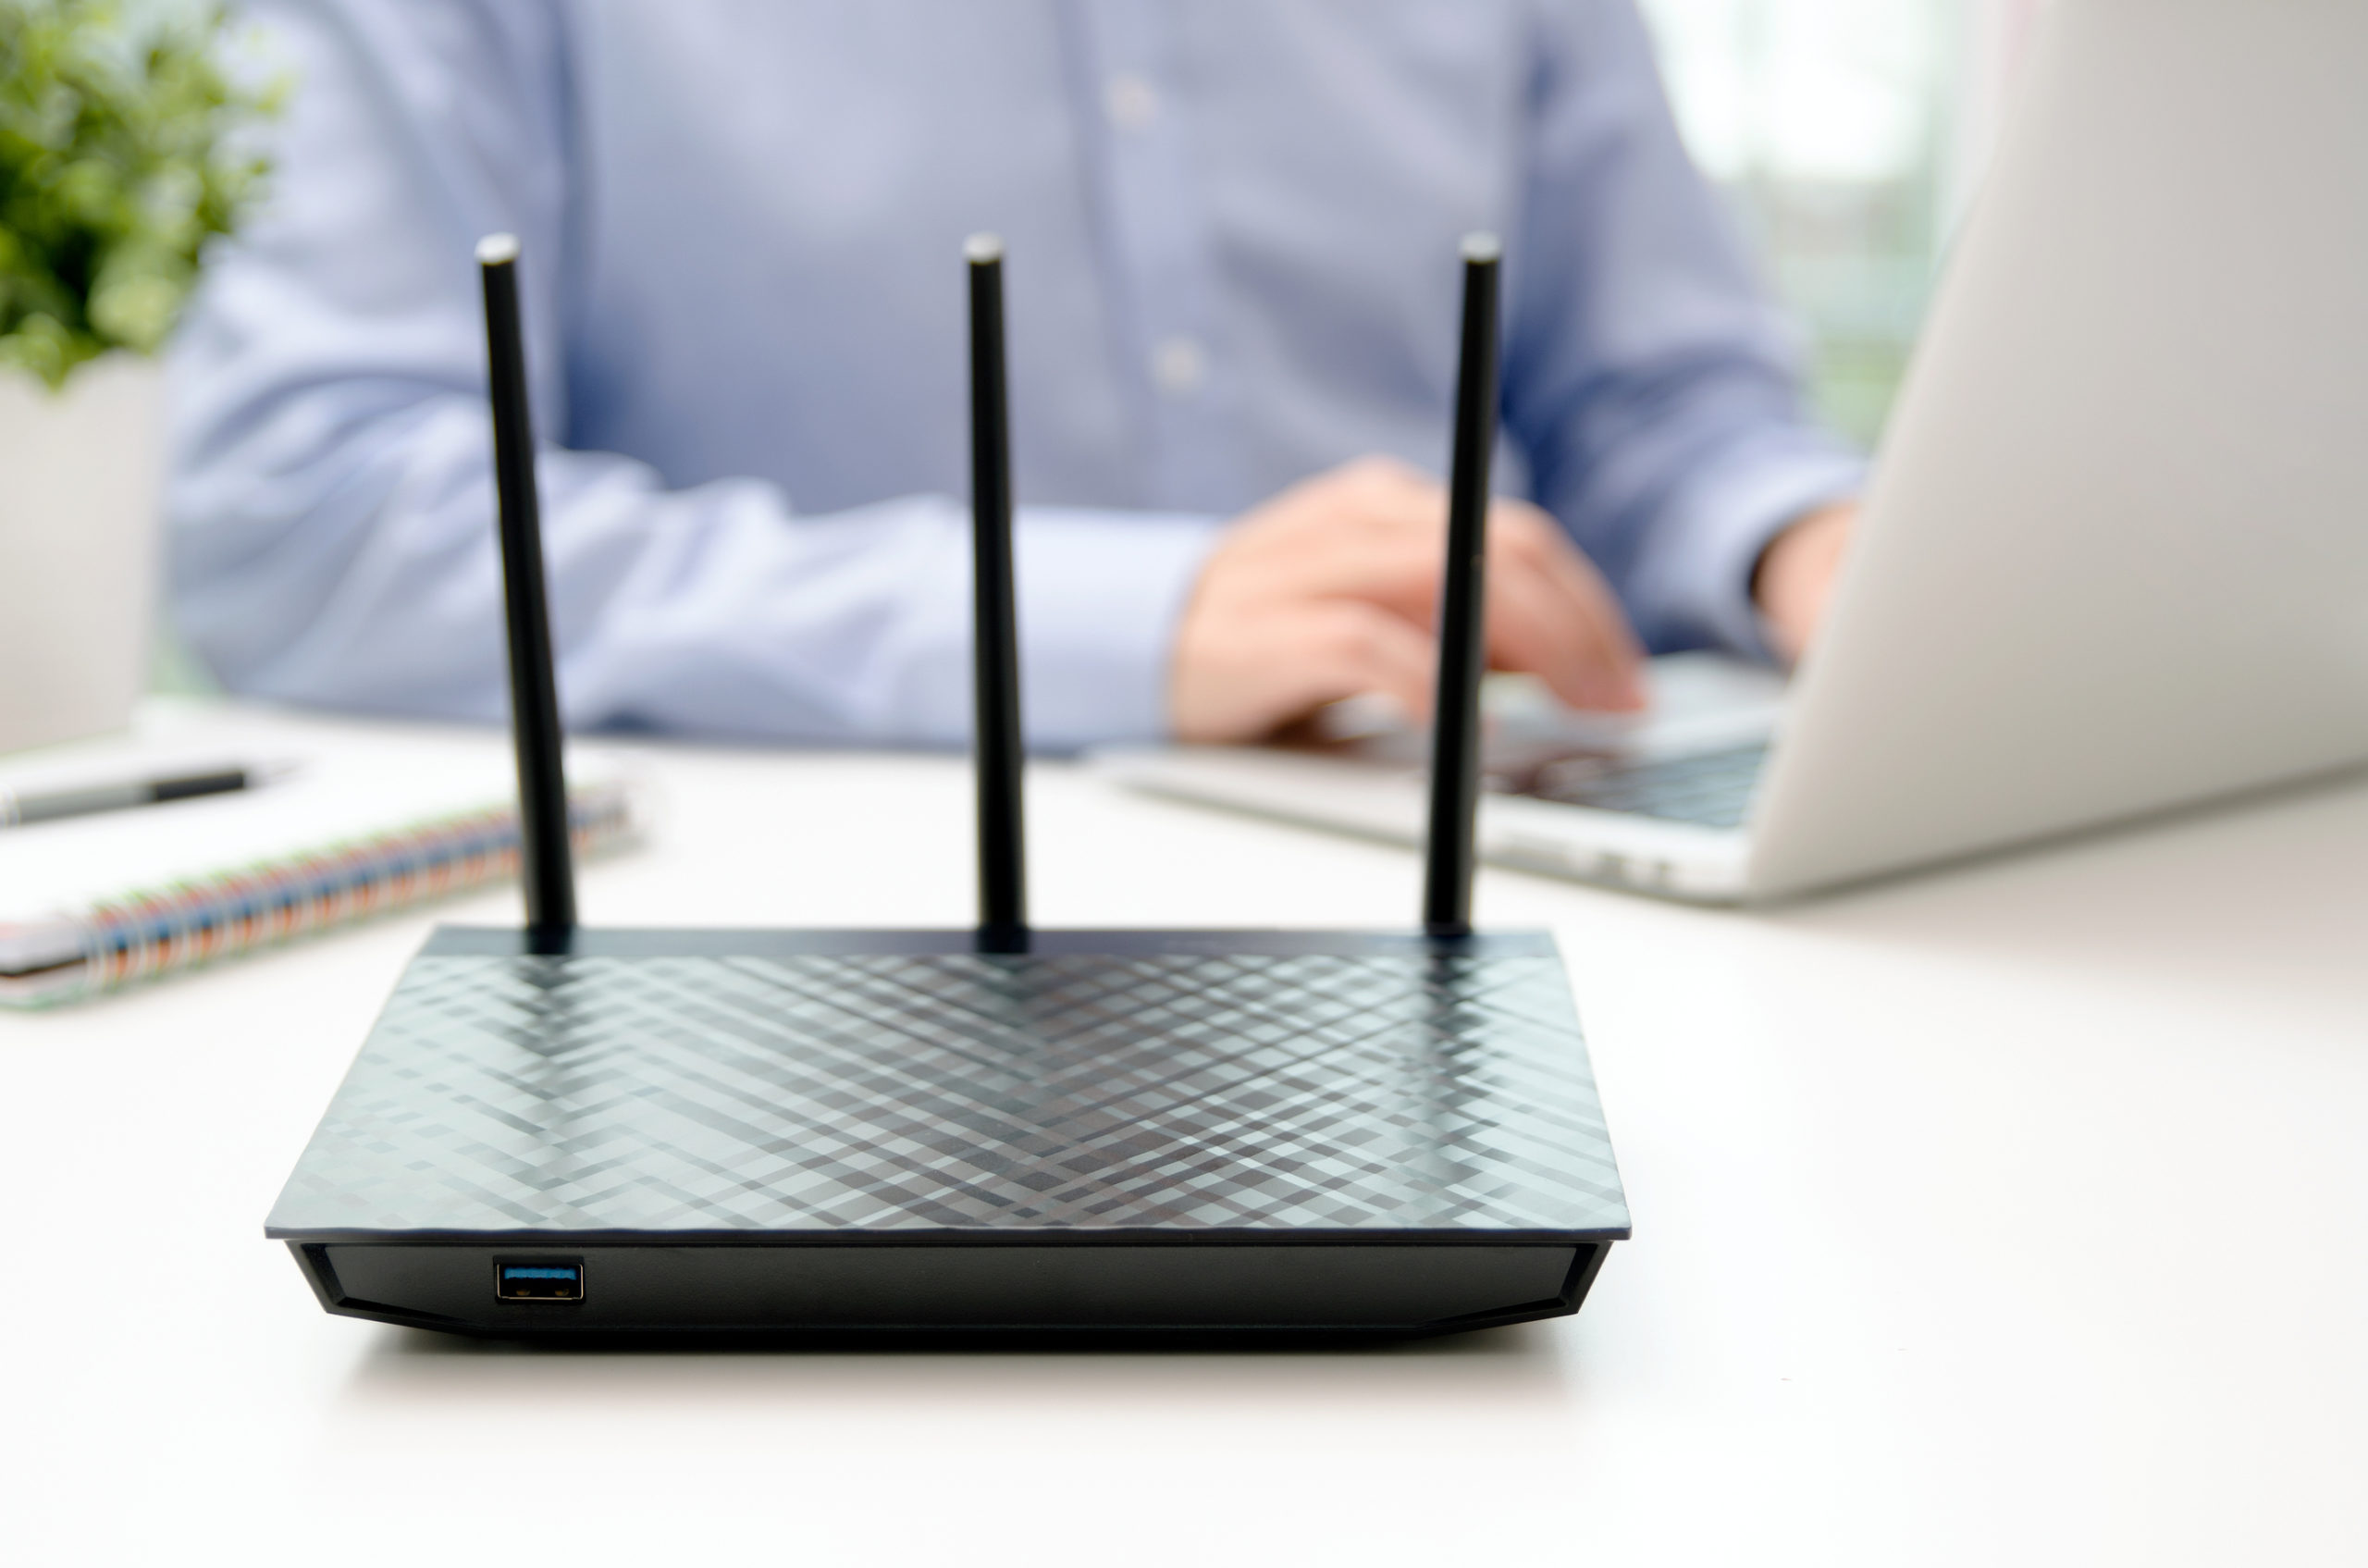 This Simple Router Segmenting Trick Can Keep Your Work PC More Secure at Home